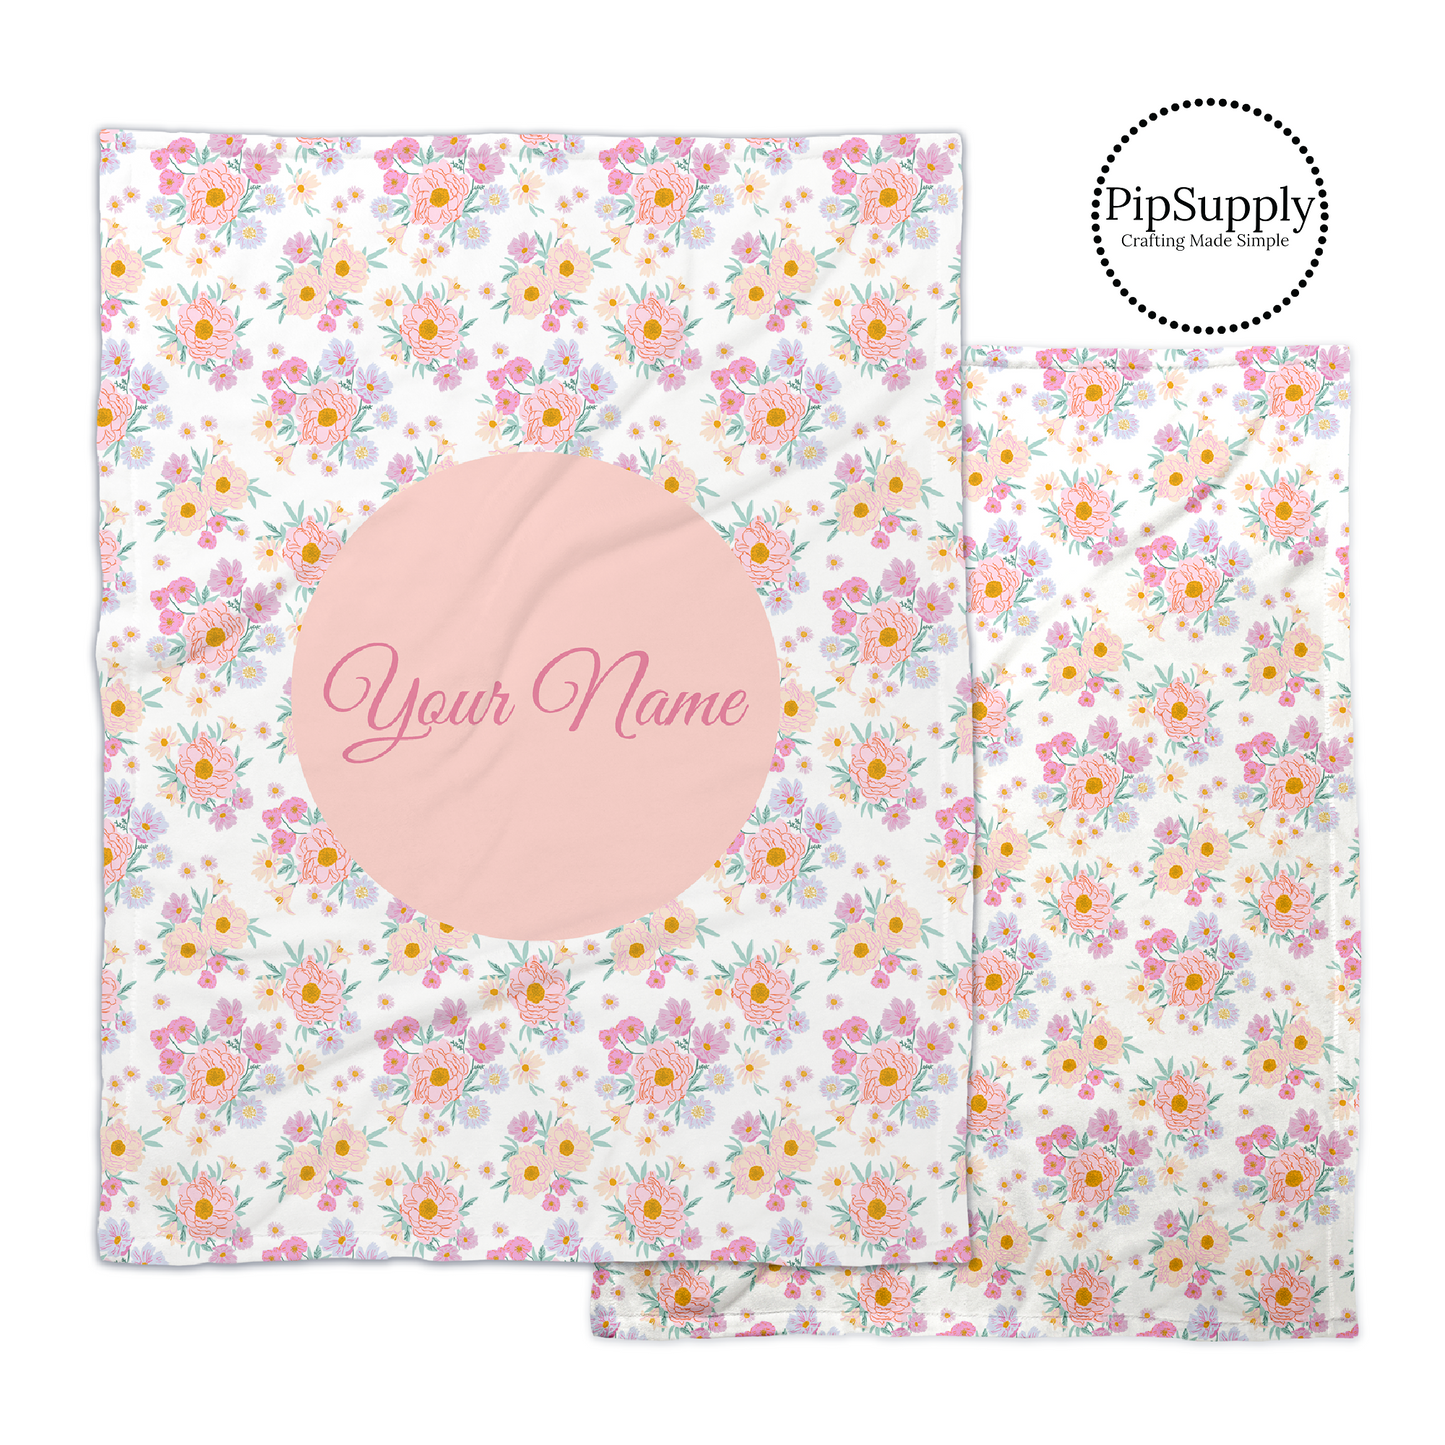 Indy Bloom design pastel pink spring floral patterned blanket with pink customizable text on pale peach center.